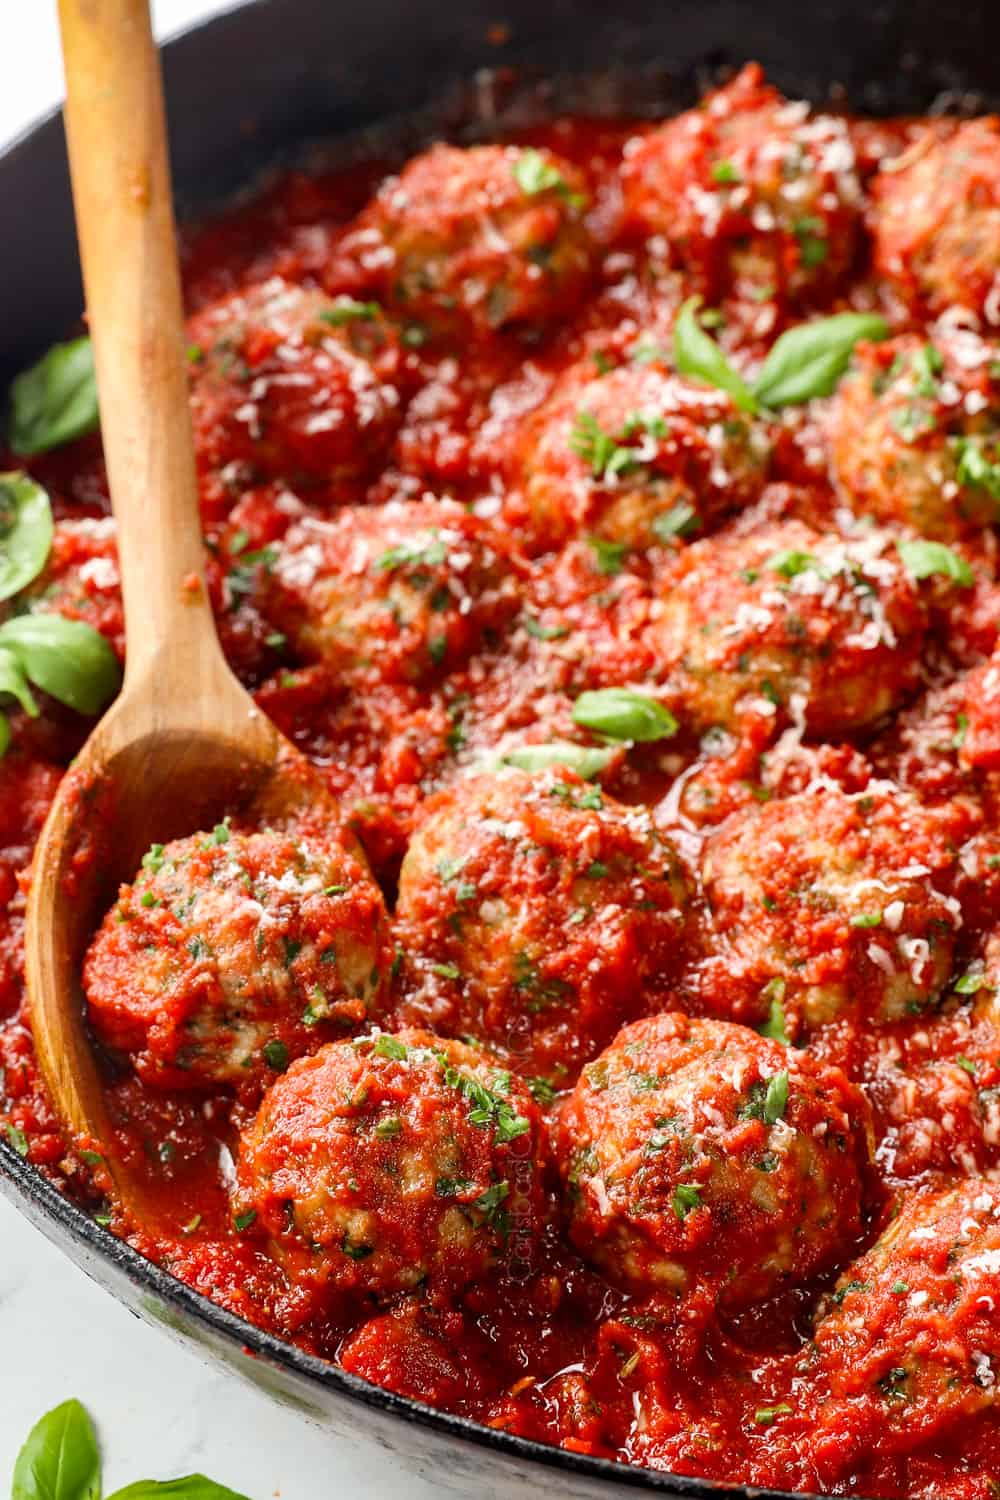 showing how to make Italian Turkey Meatballs by adding meatballs to tomato sauce